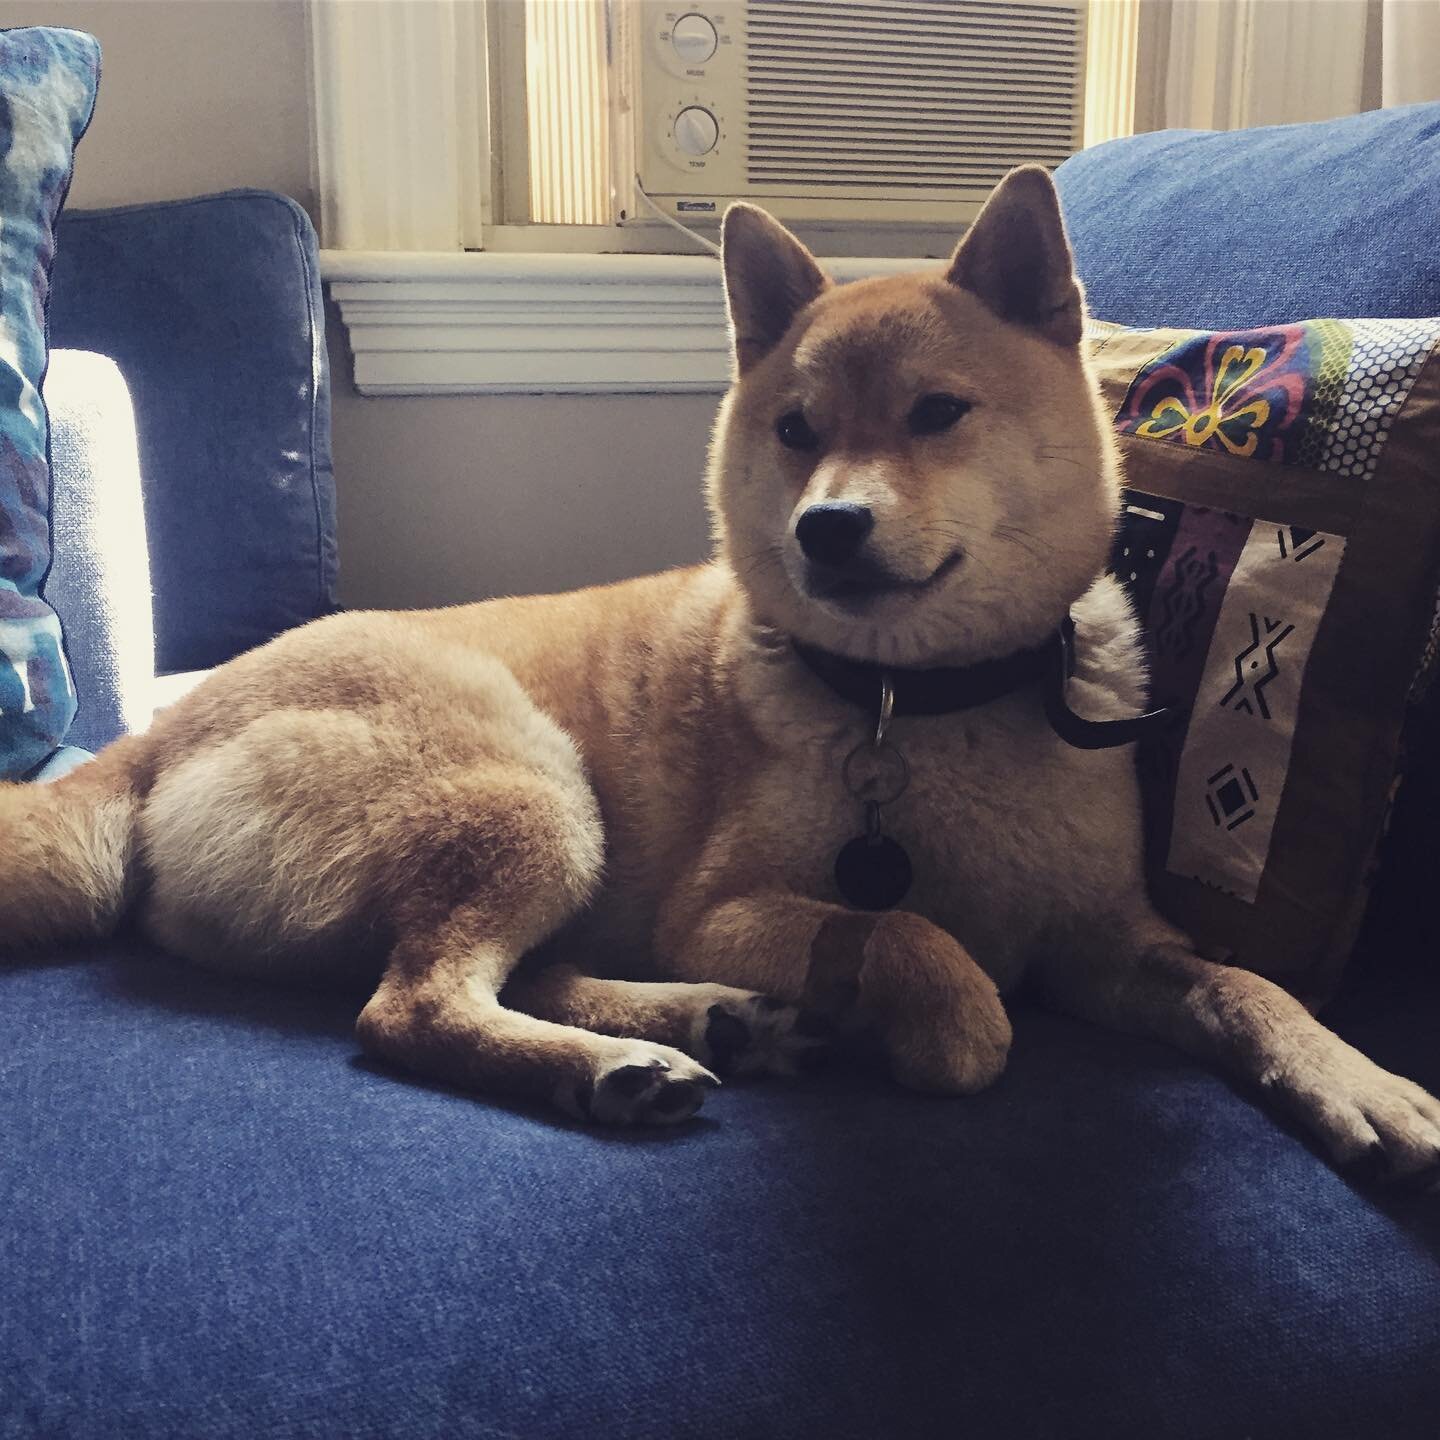 My houseguest is an absolute boss at sitting pretty @naminami_shiba